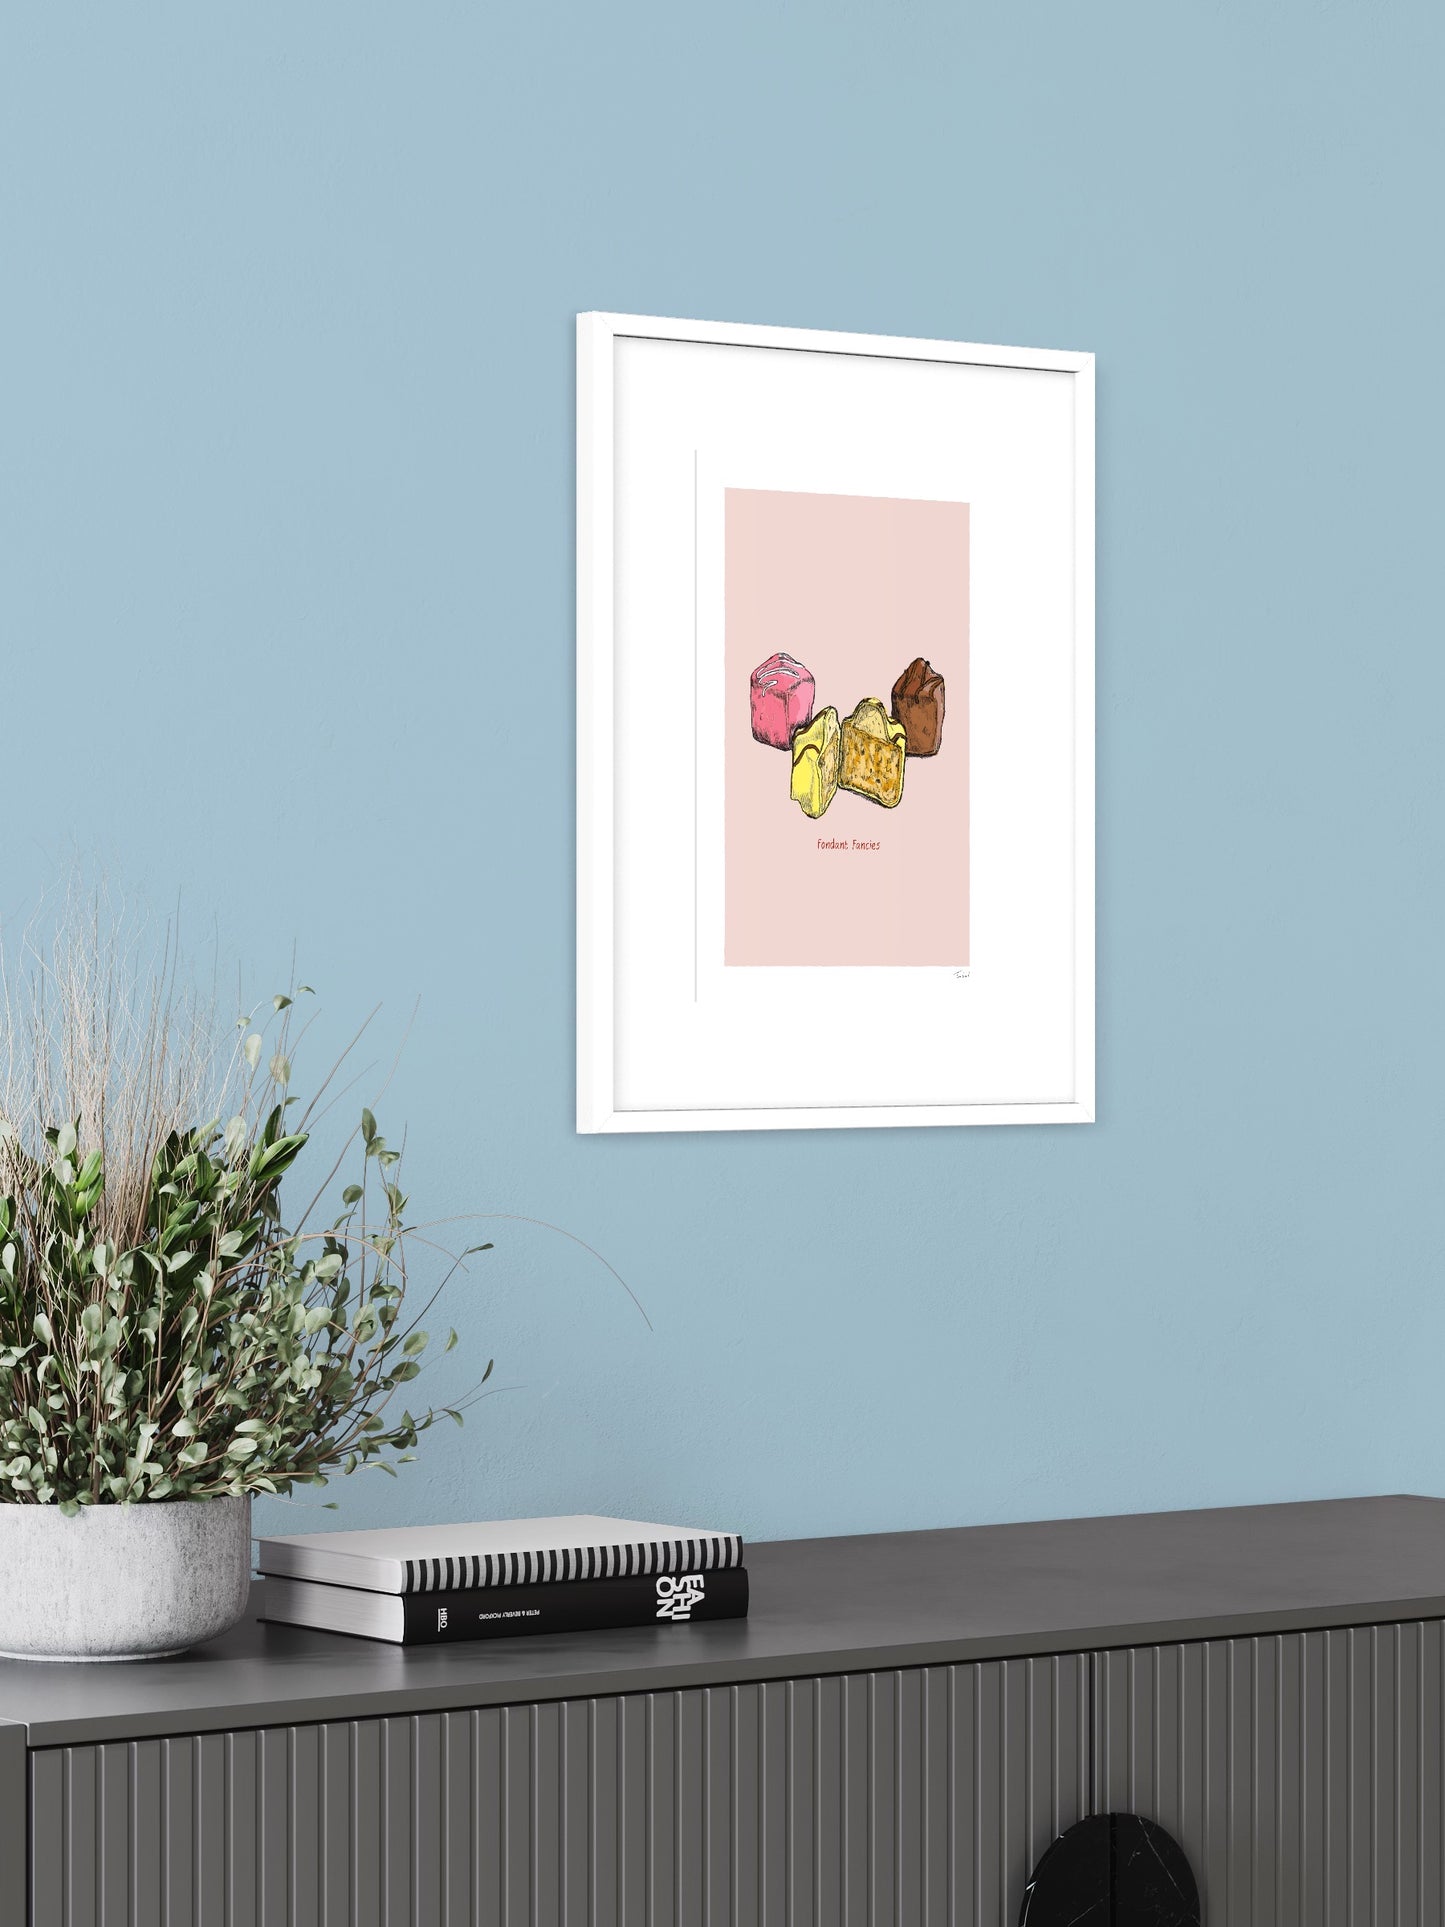 This image shows a giclee wall art print by Tom Laird Illustration of a Fondant Fancies, framed in a beautiful living room with tasteful modern home decor. This art print is available from Tom Laird Illustration in various sizes.